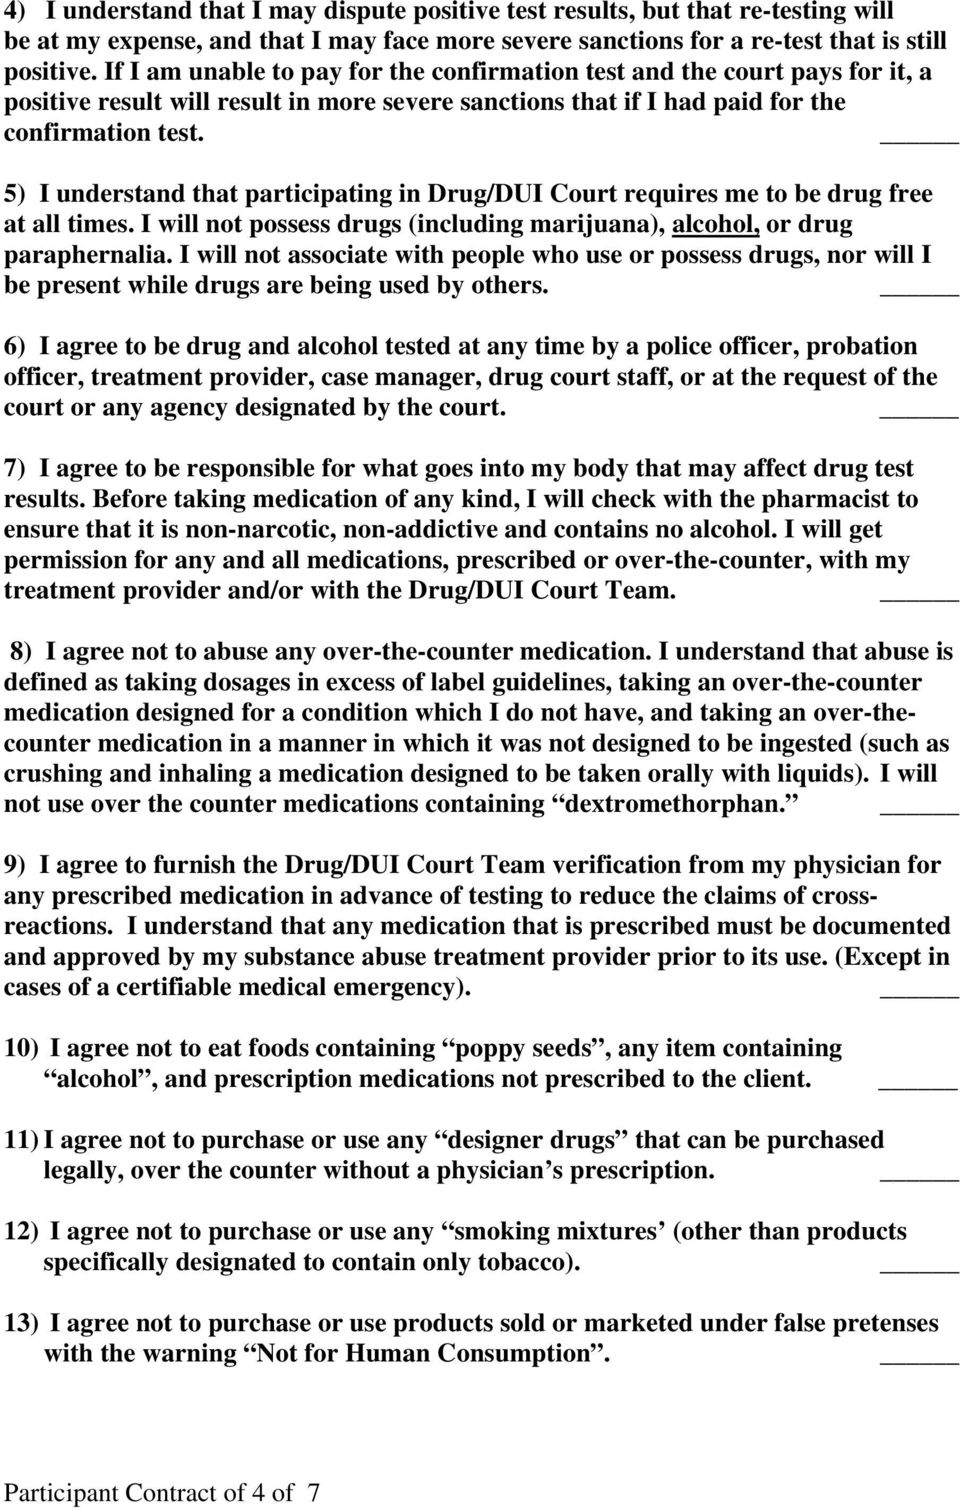 5) I understand that participating in Drug/DUI Court requires me to be drug free at all times. I will not possess drugs (including marijuana), alcohol, or drug paraphernalia.